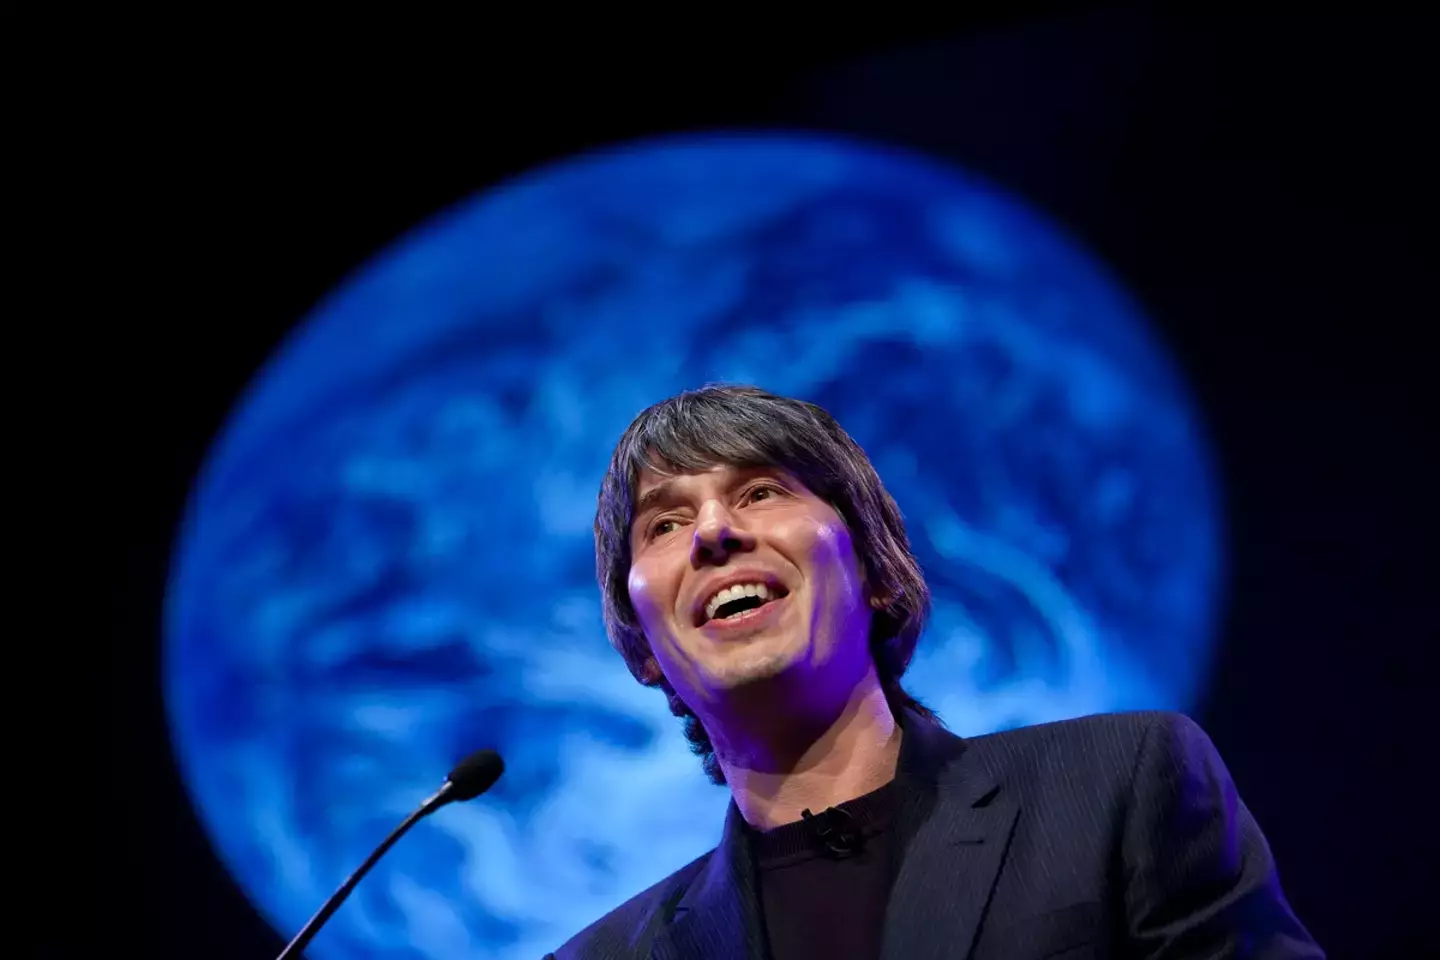 Professor Brian Cox seems to think we're alone in the universe. (David Levenson/Getty Images)